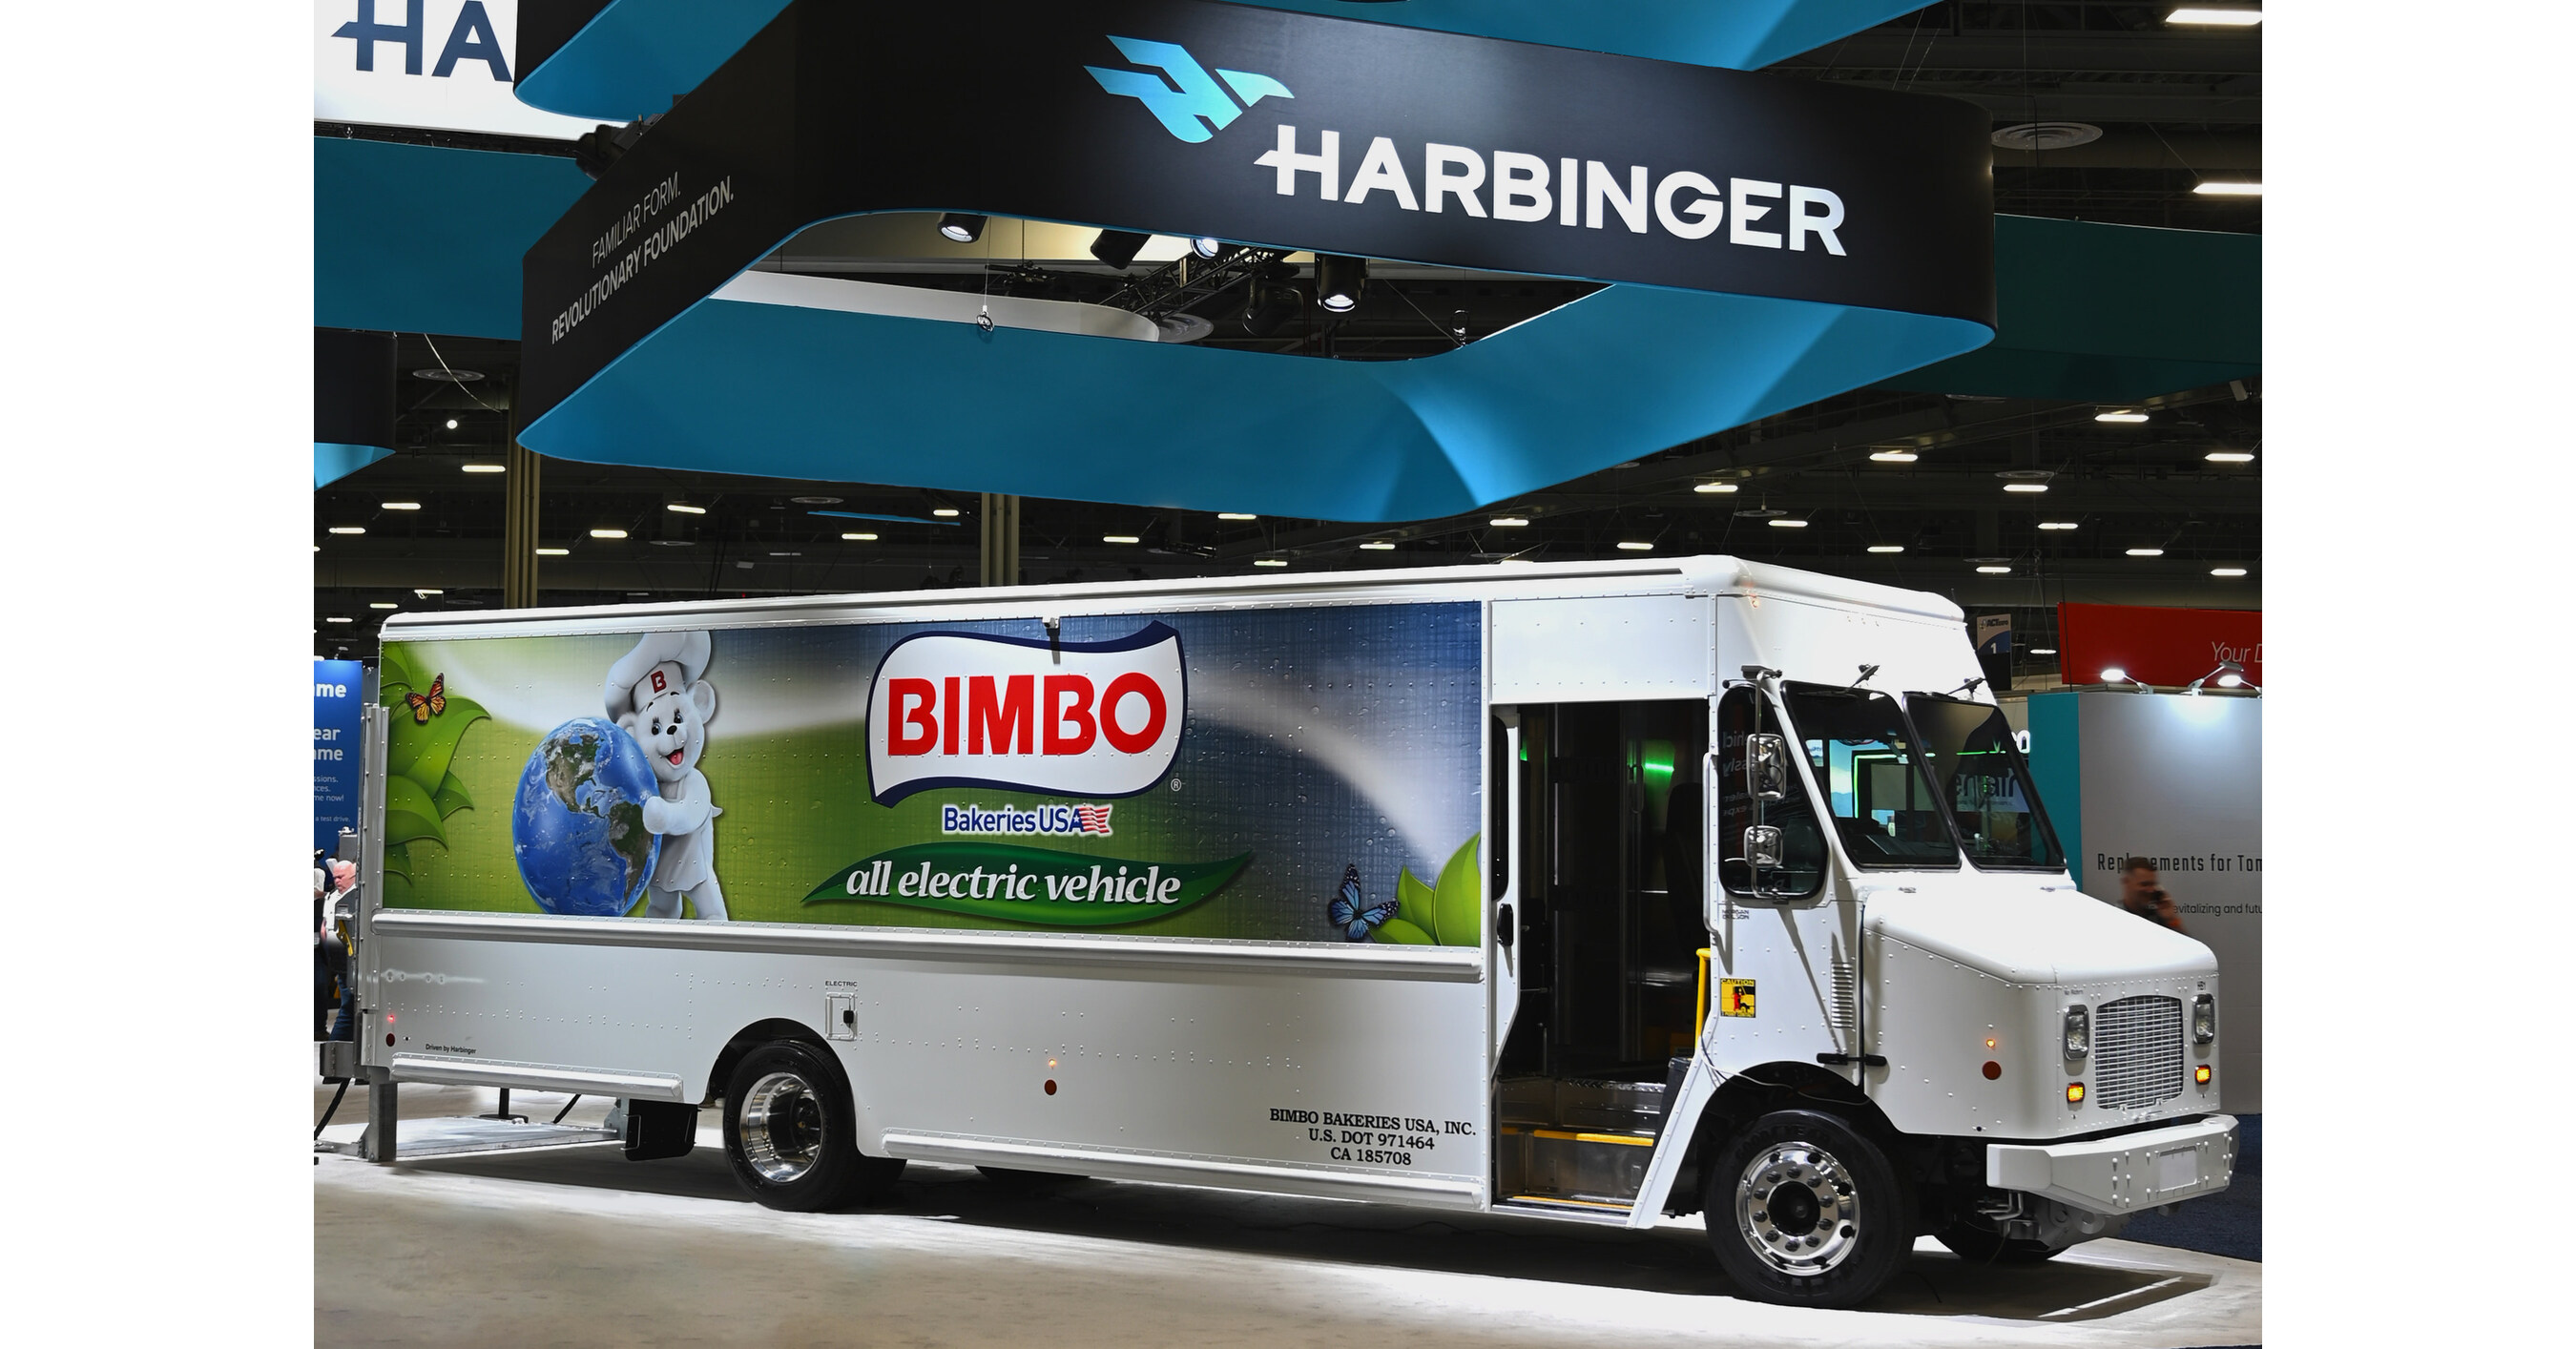 Electric Truck Company Harbinger Announces $400 Million in Customer Vehicle Orders from Bimbo Bakeries USA, RV … – PR Newswire